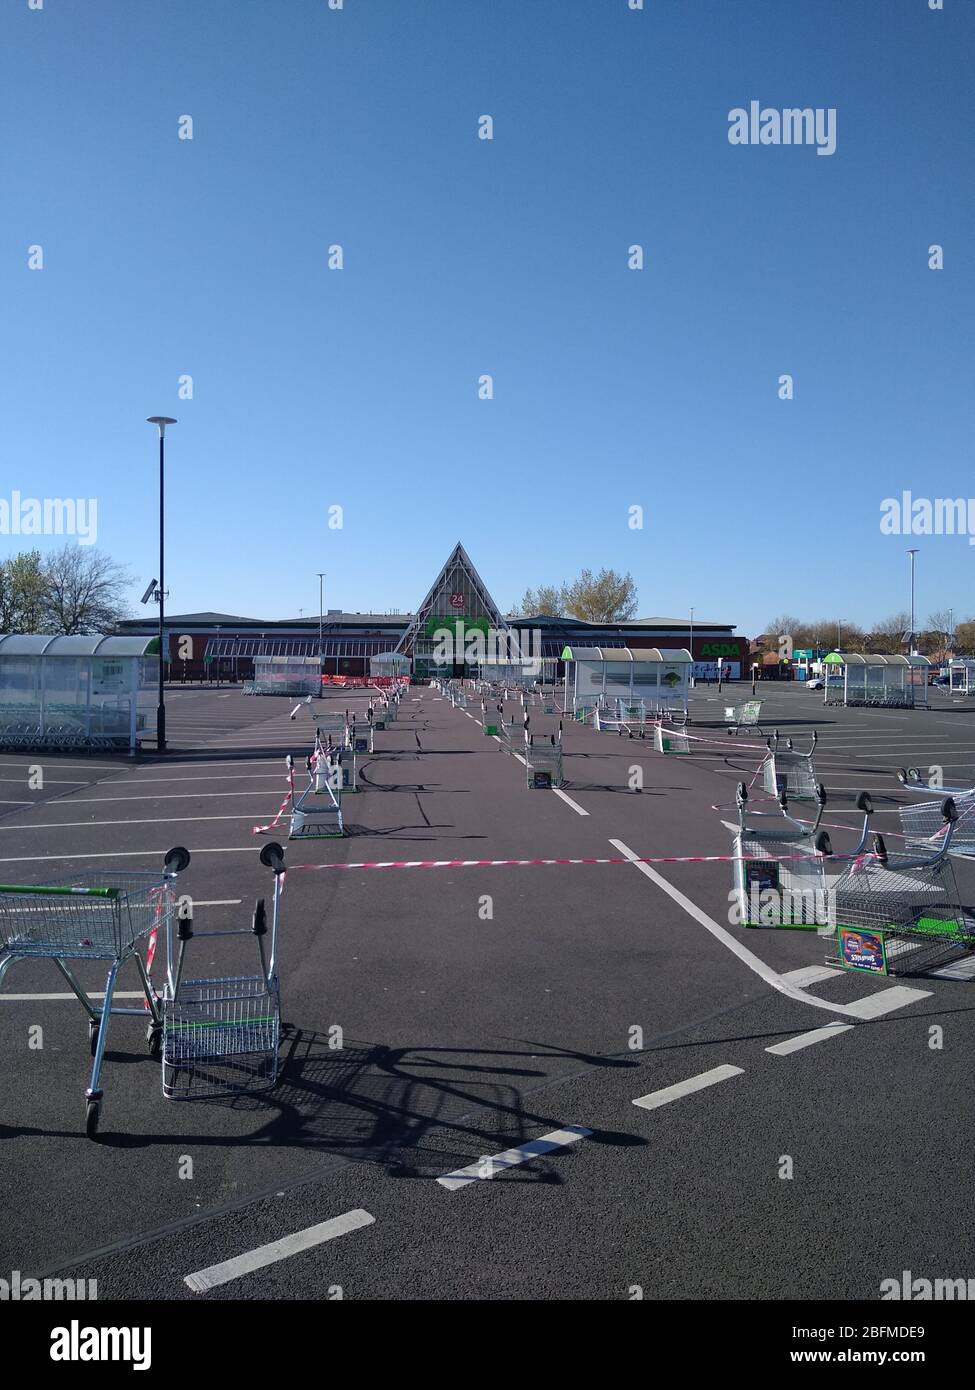 An ASDA supermarket in St Helens, UK uses a line of trolleys/carts in its car park to keep customers socially distanced due the COVID-19 virus. Stock Photo